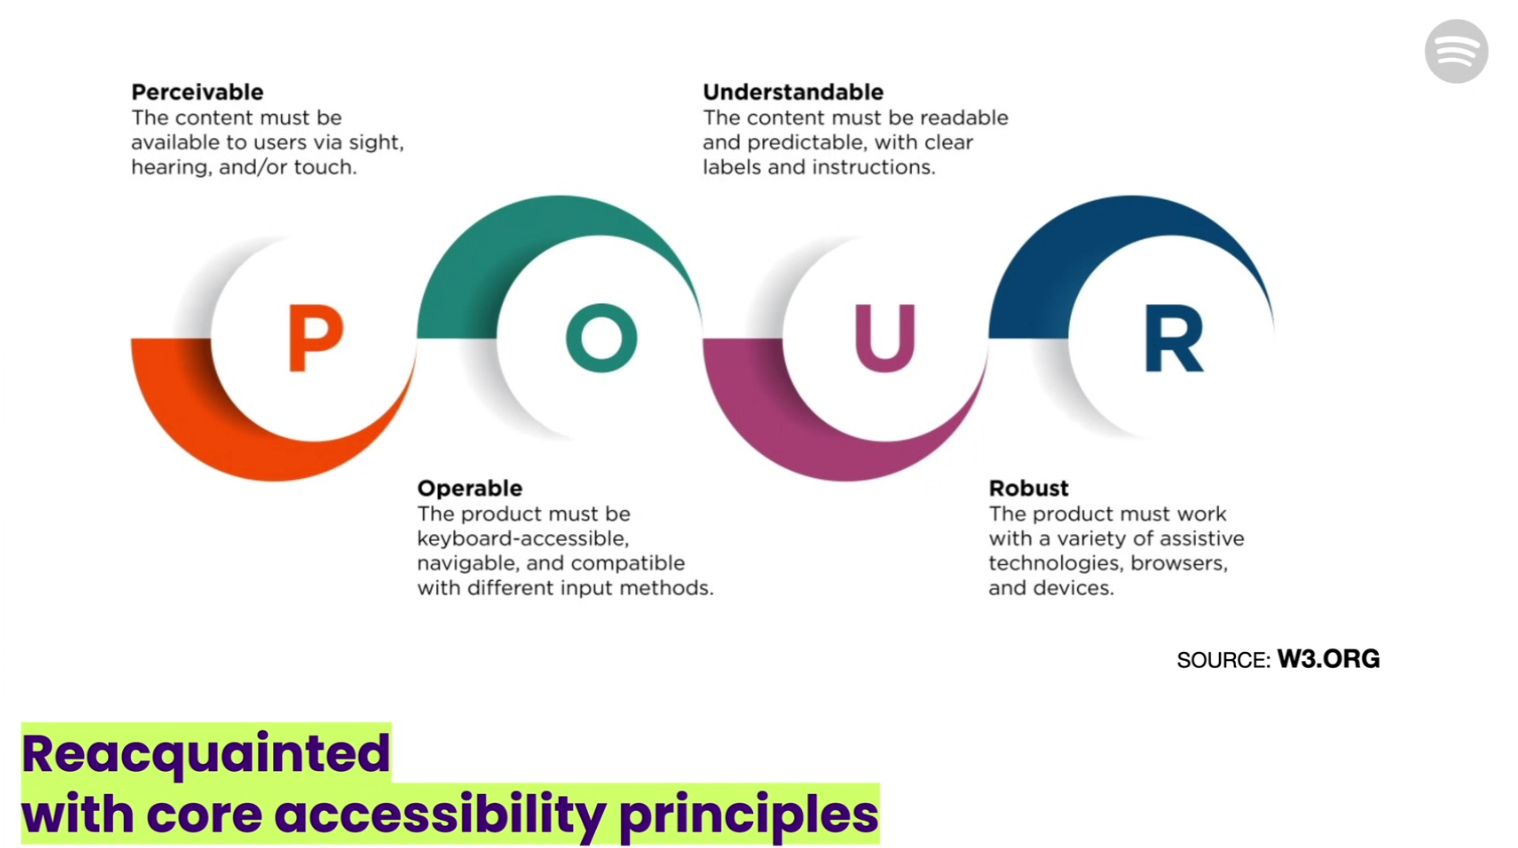 The four principles on an image. In short "POUR". Perceivable: the content must be available to users via sight, hearing, and/or touch. Operable: The product must be keyboard-accessible navigable, and compatible with different input methods. Understandable: the content must be readable and predictable, with clear labels and instructions. Robust: the product must work with a variety of assistive technologies browsers, and devices. 